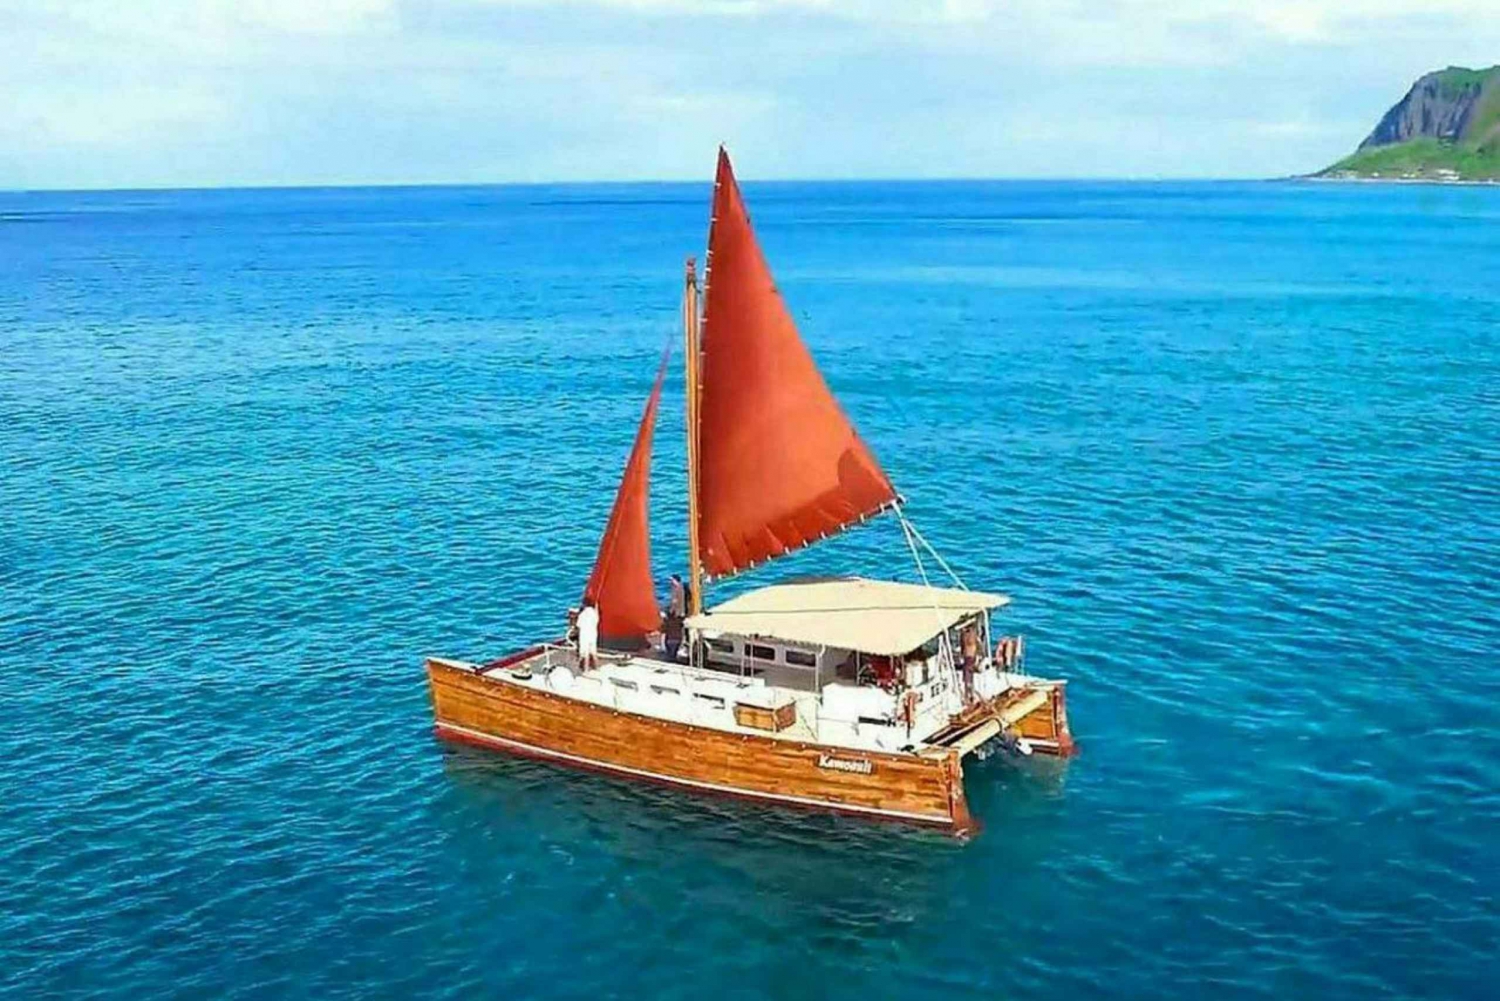 Oahu: Cultural Day Excursion on Polynesian Canoe